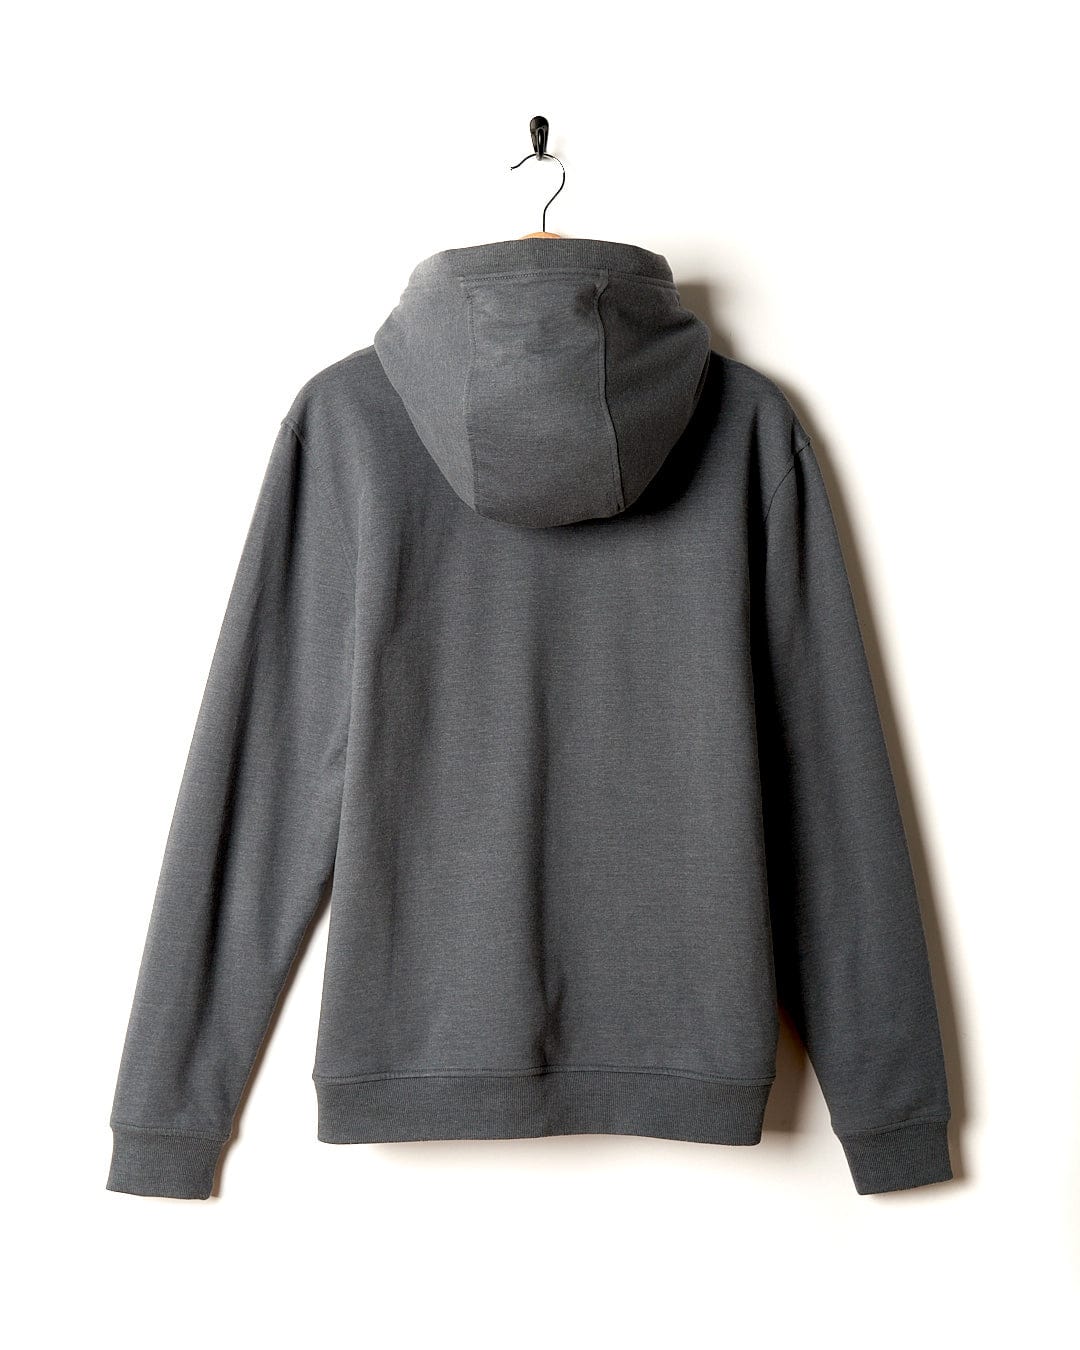 A Speed - Mens Borg Lined Hoodie - Grey by Saltrock hanging on a white wall.